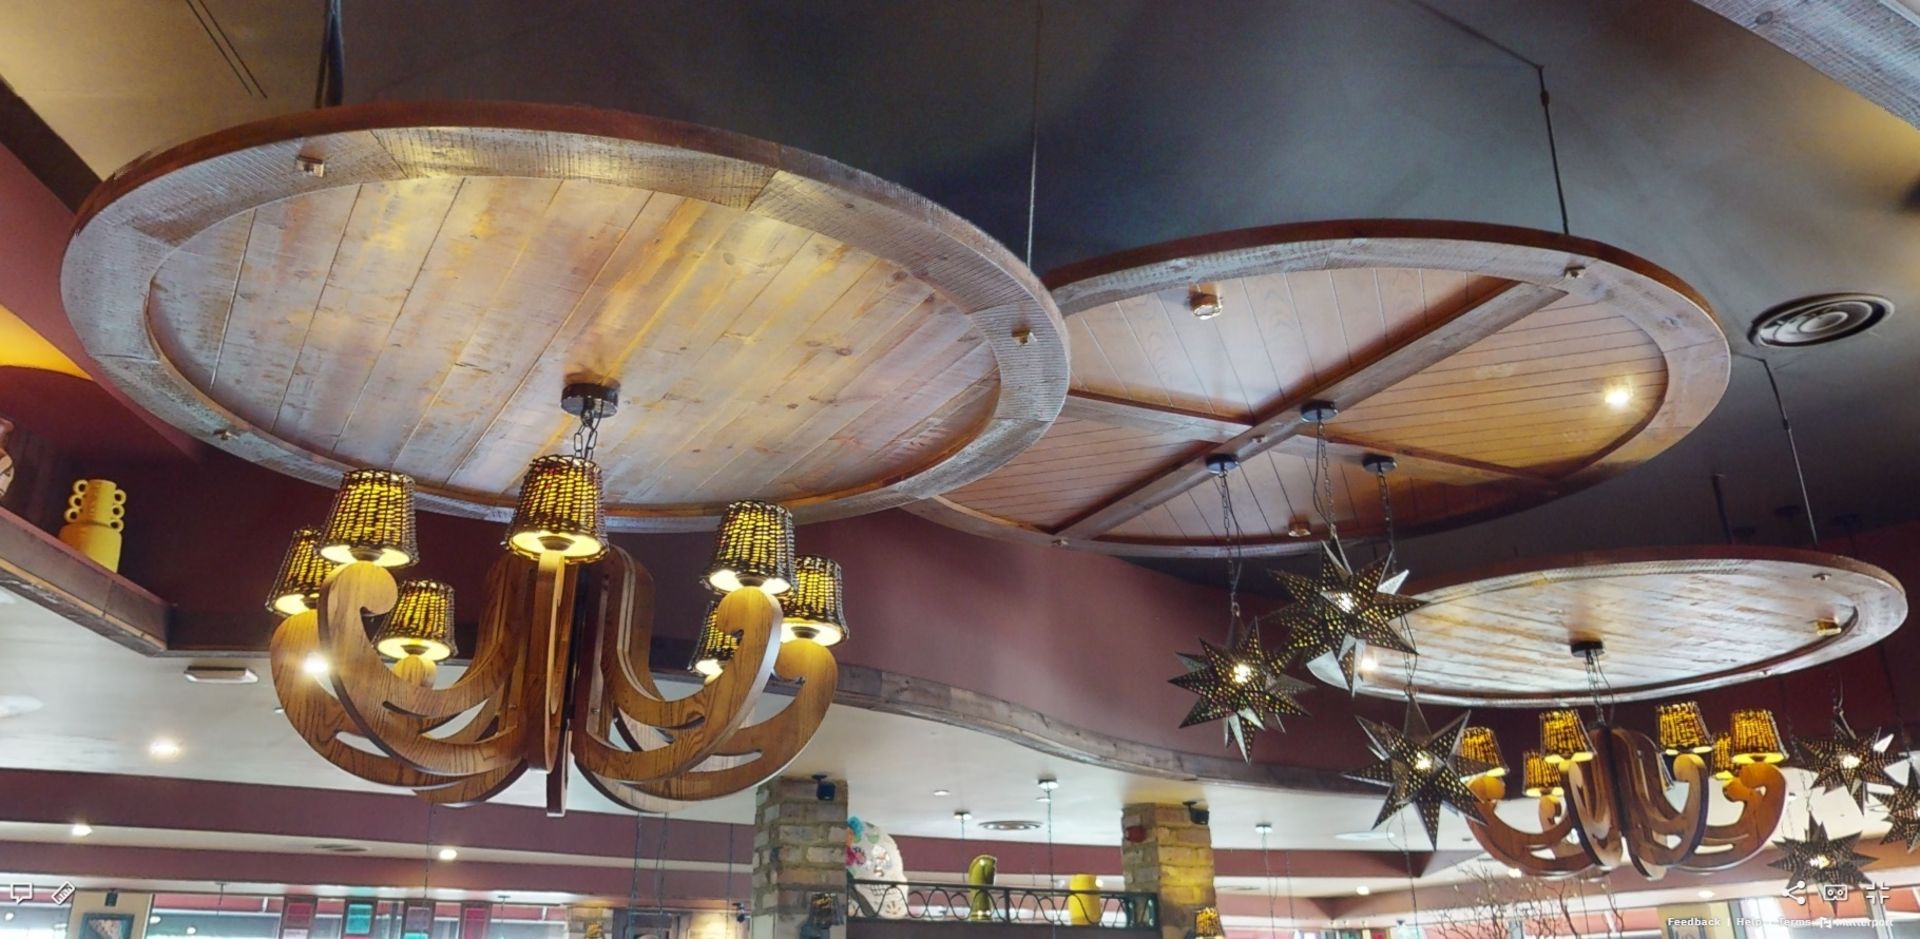 1 x Bespoke Overhead Ceiling Mounted Wooden Panel - Approx Width 200 cms - Image 2 of 3